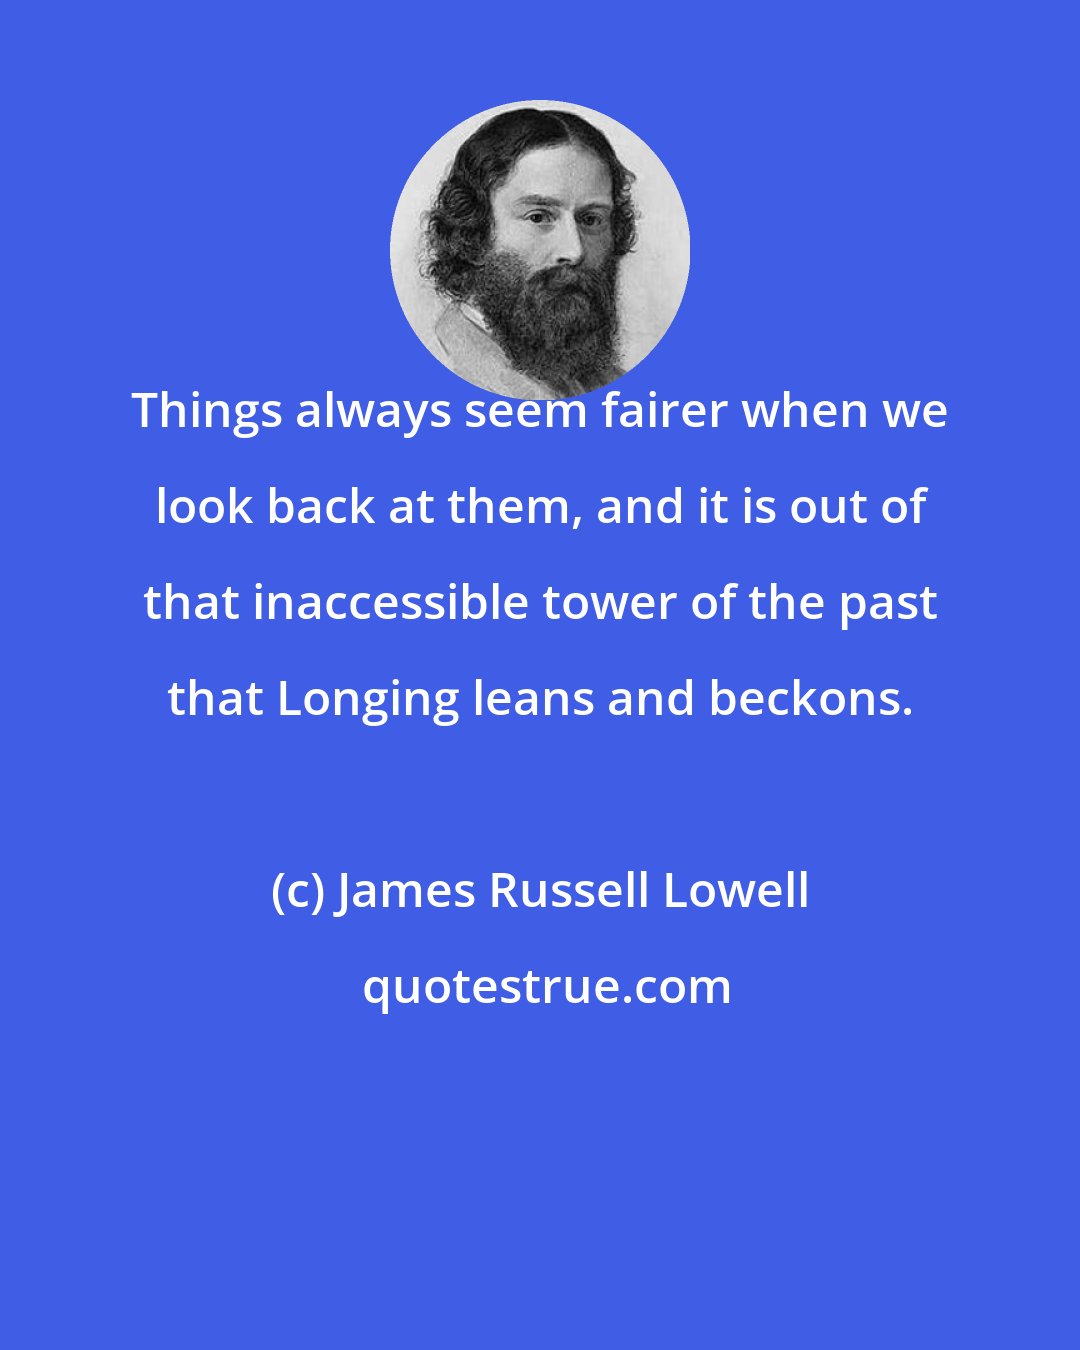 James Russell Lowell: Things always seem fairer when we look back at them, and it is out of that inaccessible tower of the past that Longing leans and beckons.